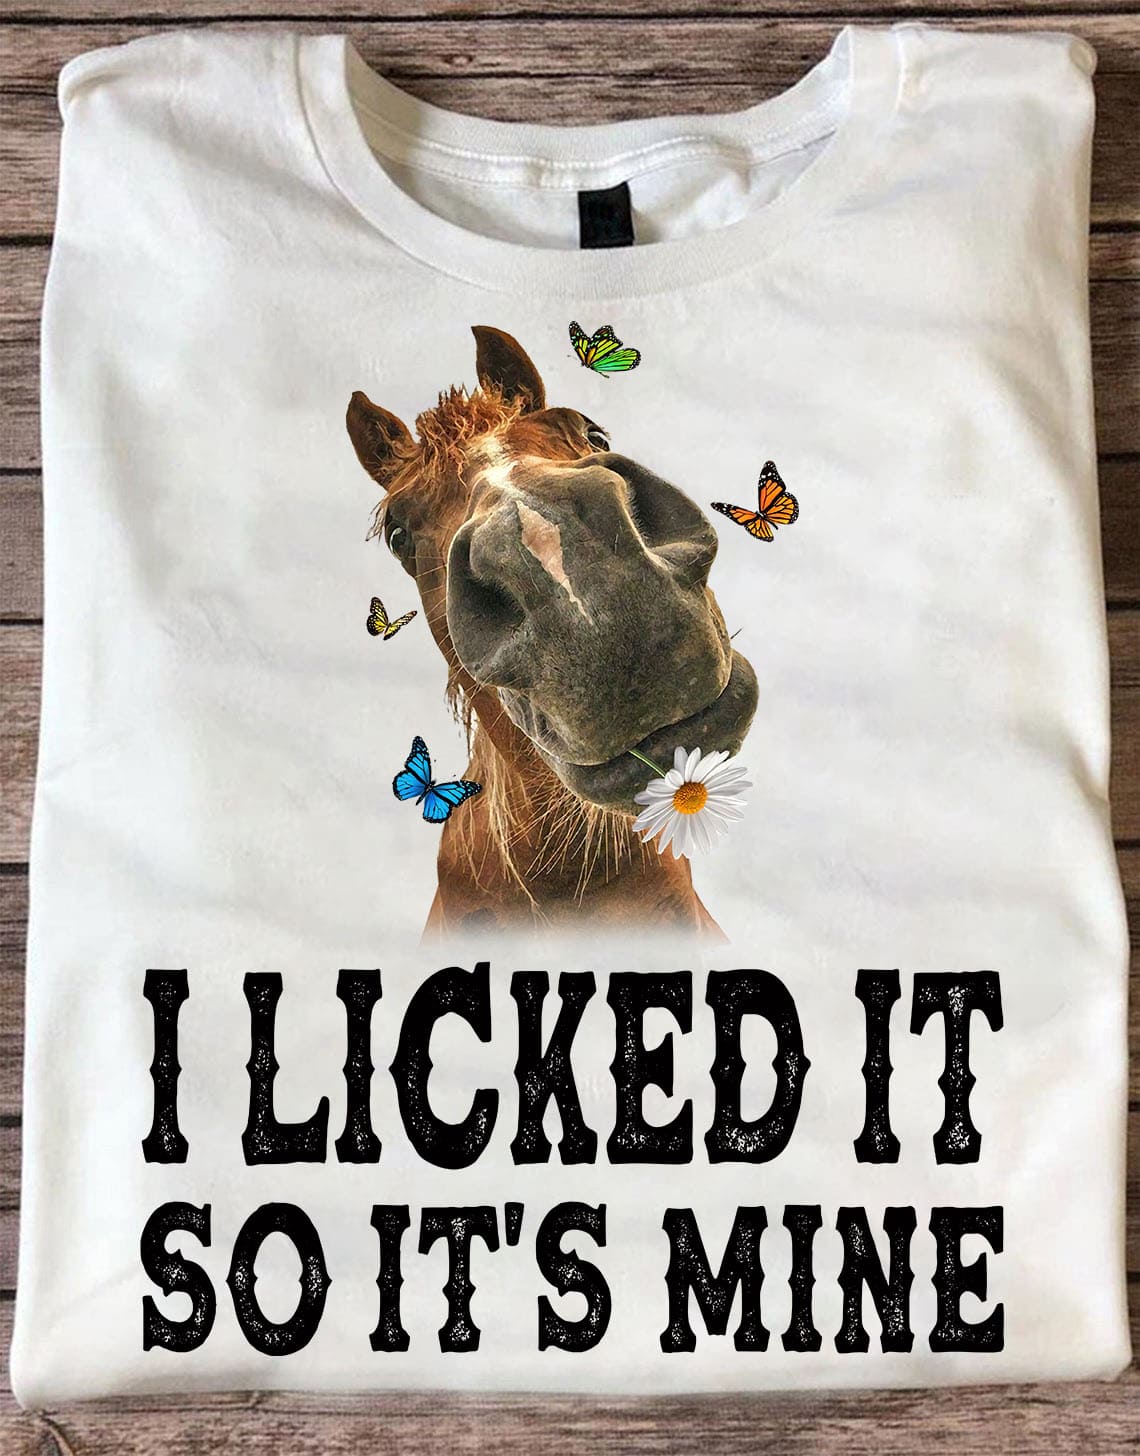 I licked it so it's mine - Funny horse T-shirt, horse and butterflies